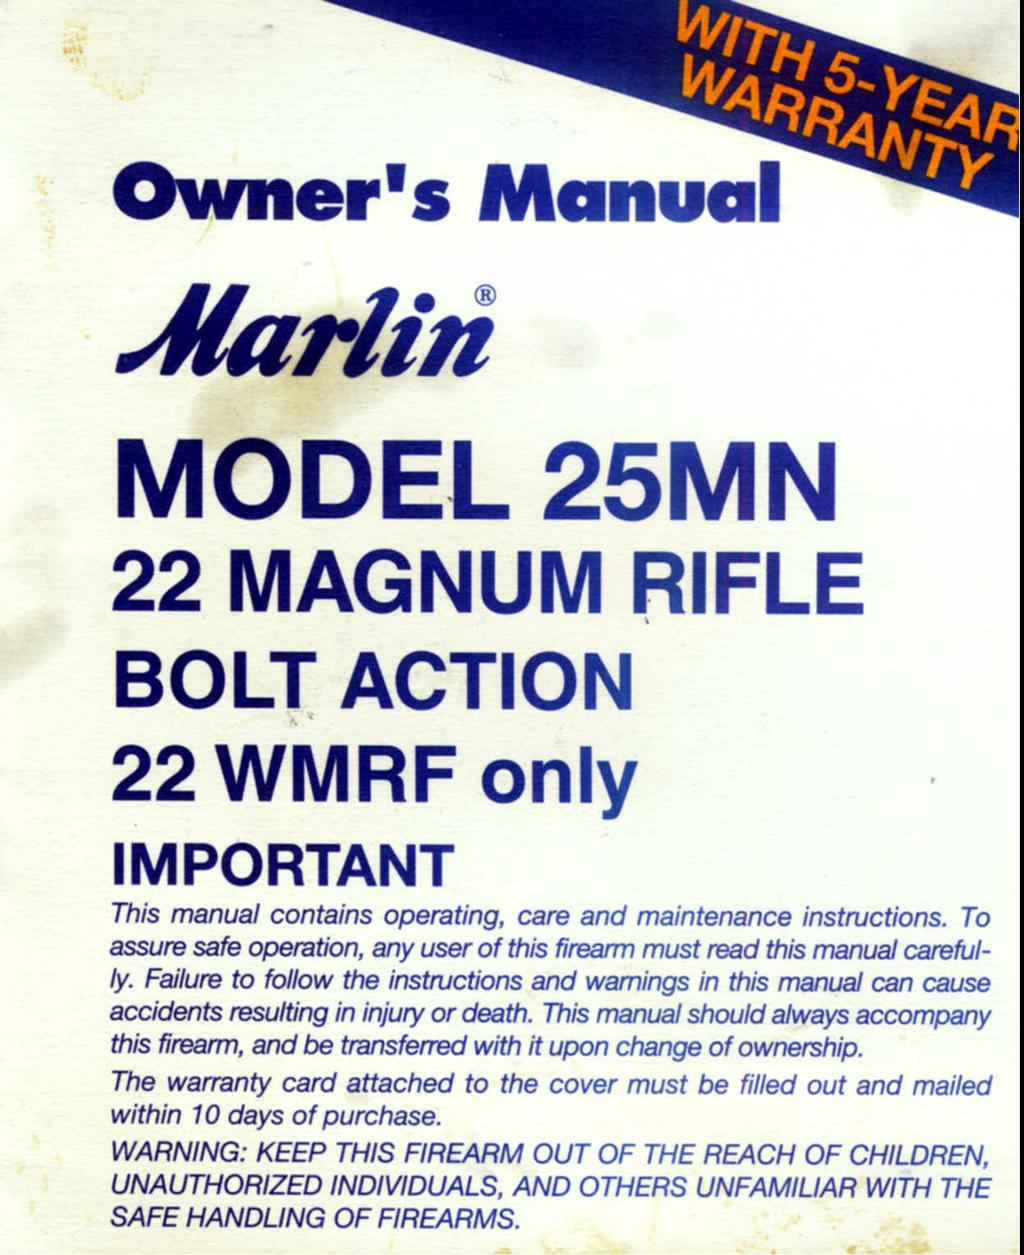 Owner's Manual 7]",., 5. W-'1I1I1-'1N~ y Alar/Iii MODE.L 25MN 22 MAGNUM RIFLE BOLT ACTION.. ~ 22 WMRF only IMPORTANT This manual contains operating, care and maintenance instructions.